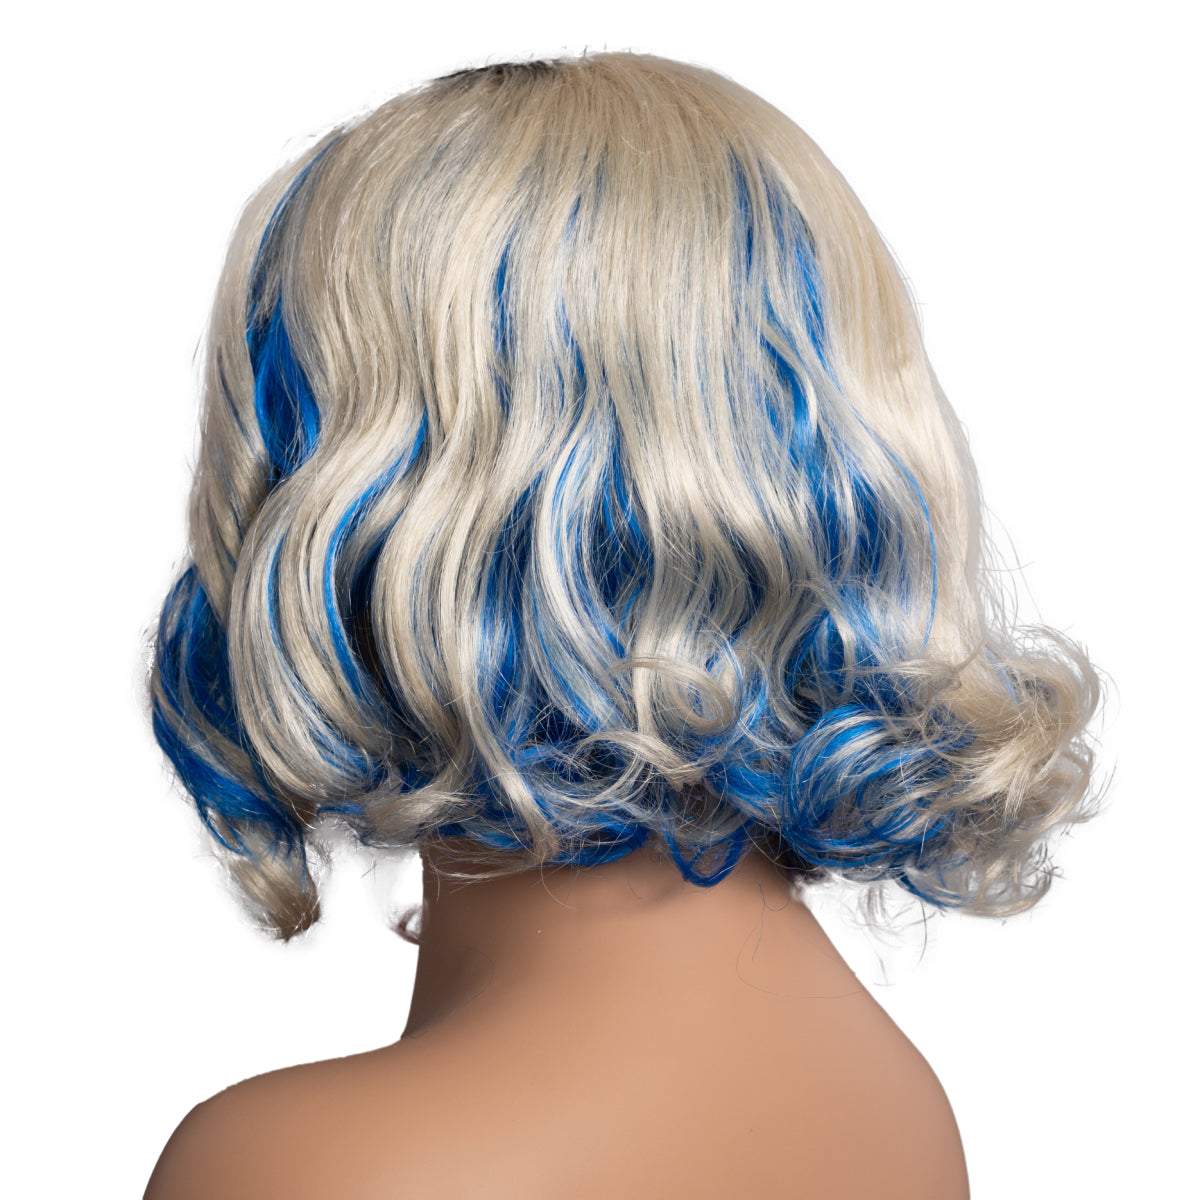 Enid Sinclair Netflix Wednesday TV Show costume Wig Back View